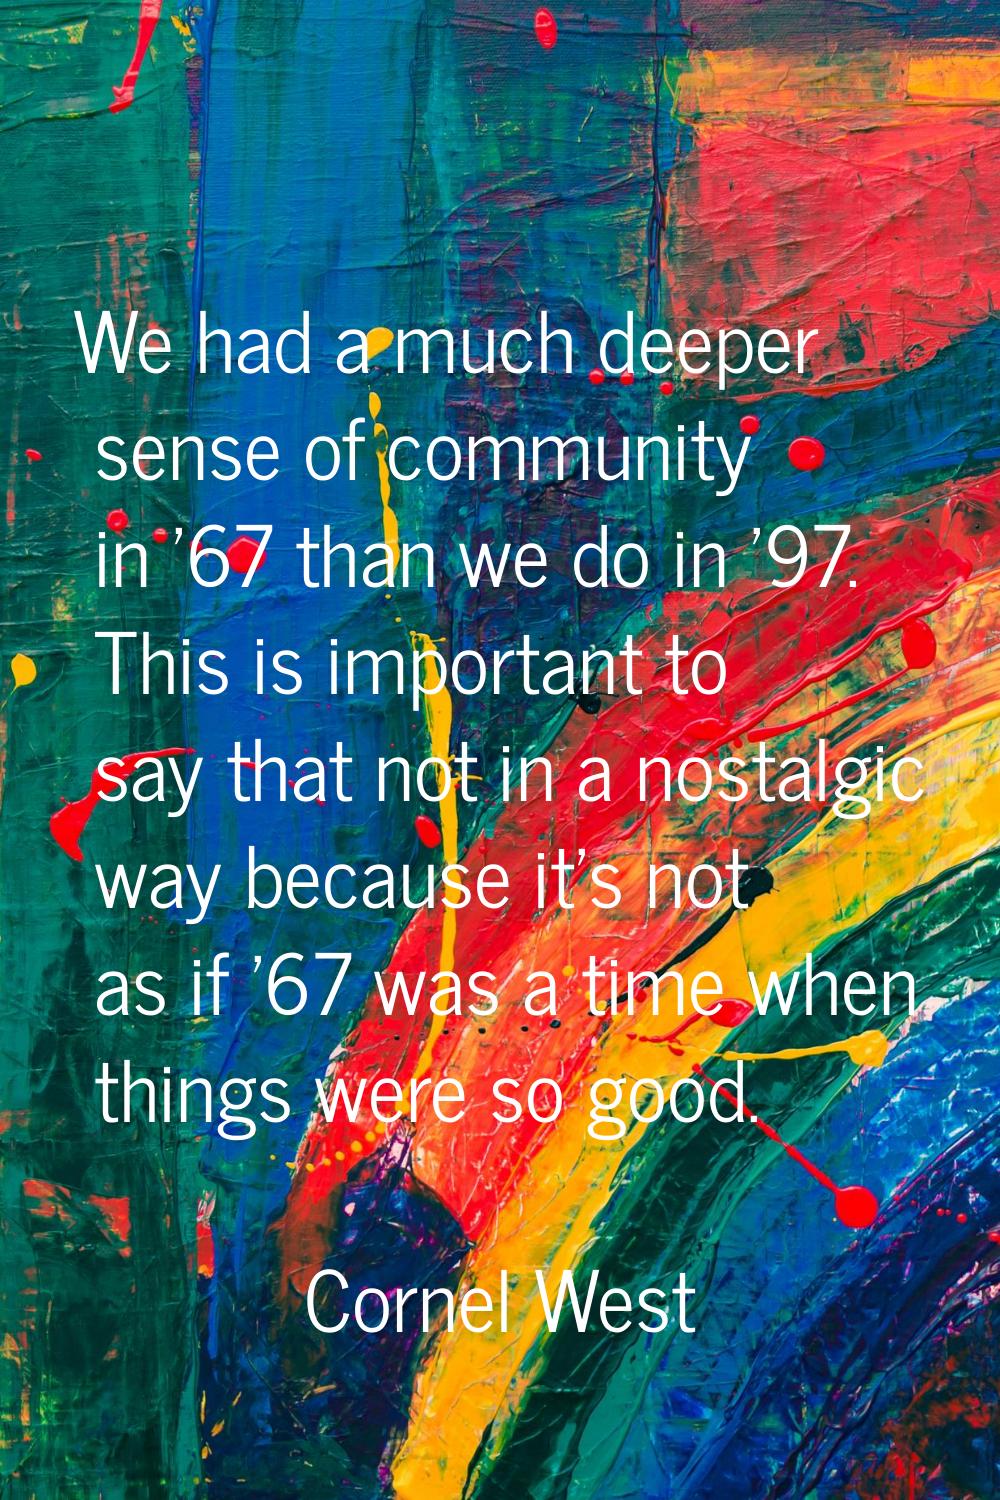 We had a much deeper sense of community in '67 than we do in '97. This is important to say that not